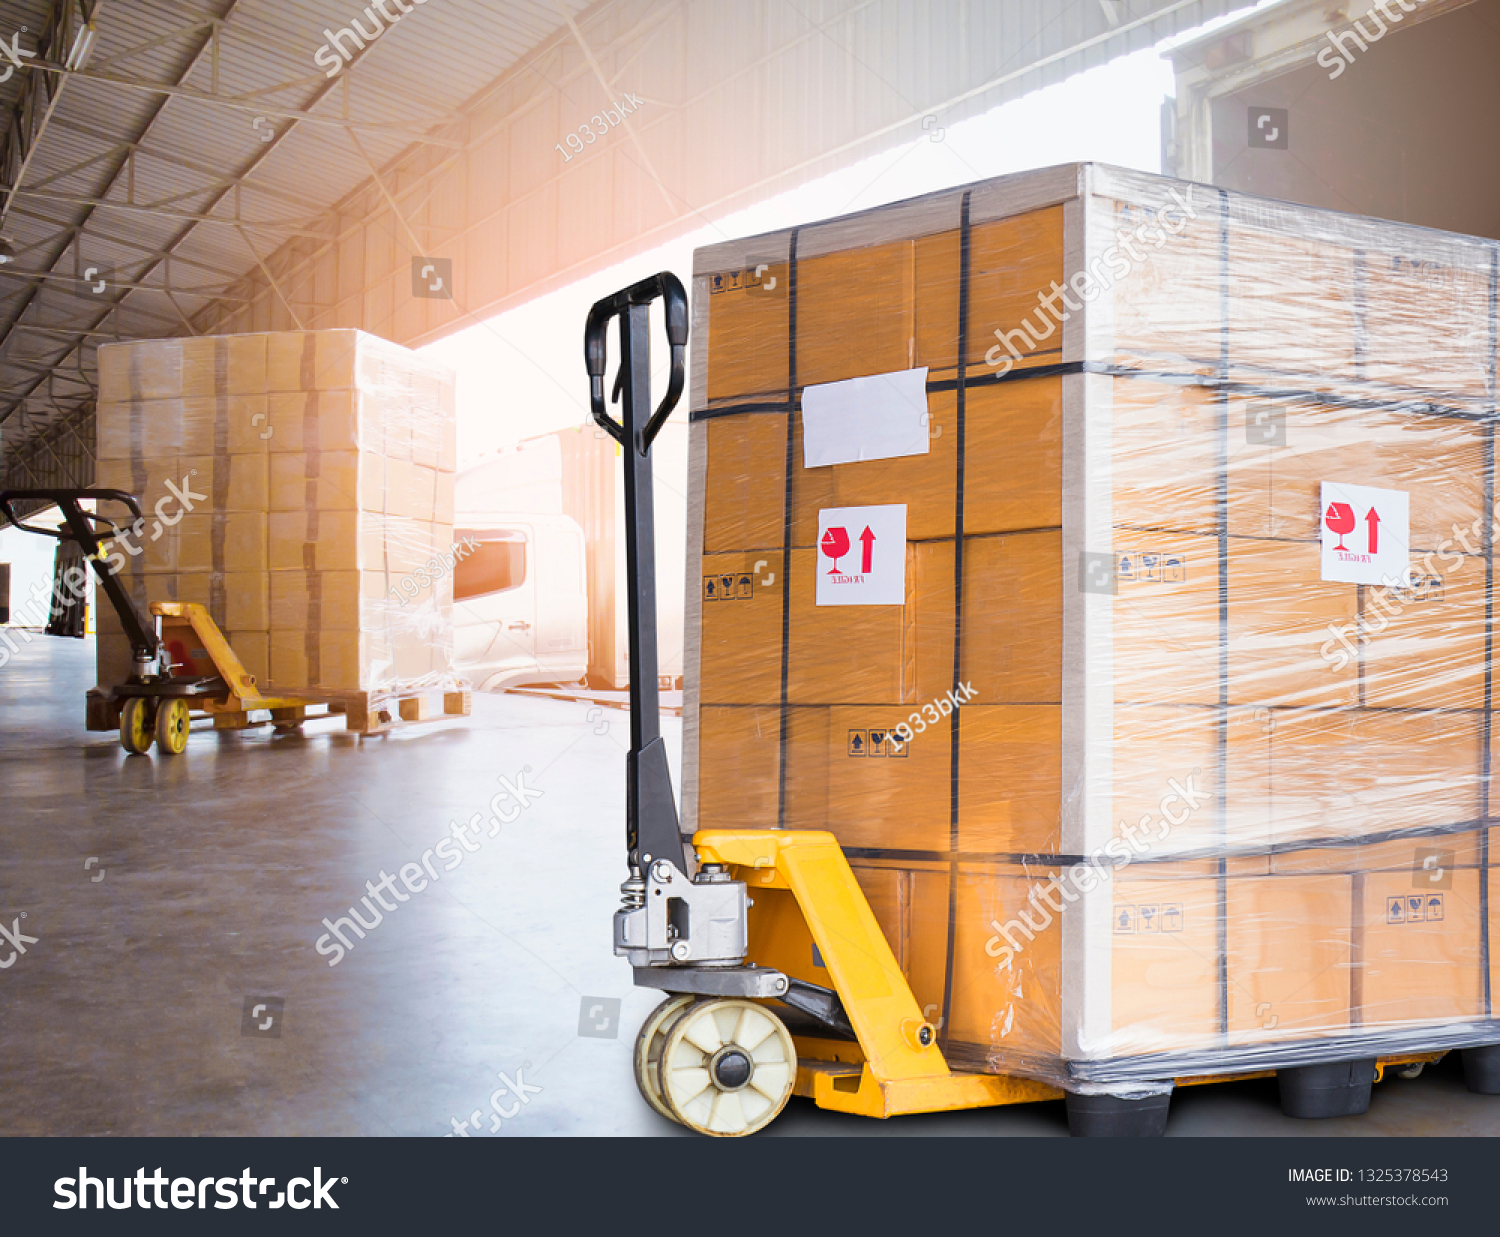 Large cargo shipment pallets. Hand pallet truck with stacked cardboard boxes wrapping plastic on pallet at warehouse dock. warehouse industry freight, logistics and transport.  #1325378543